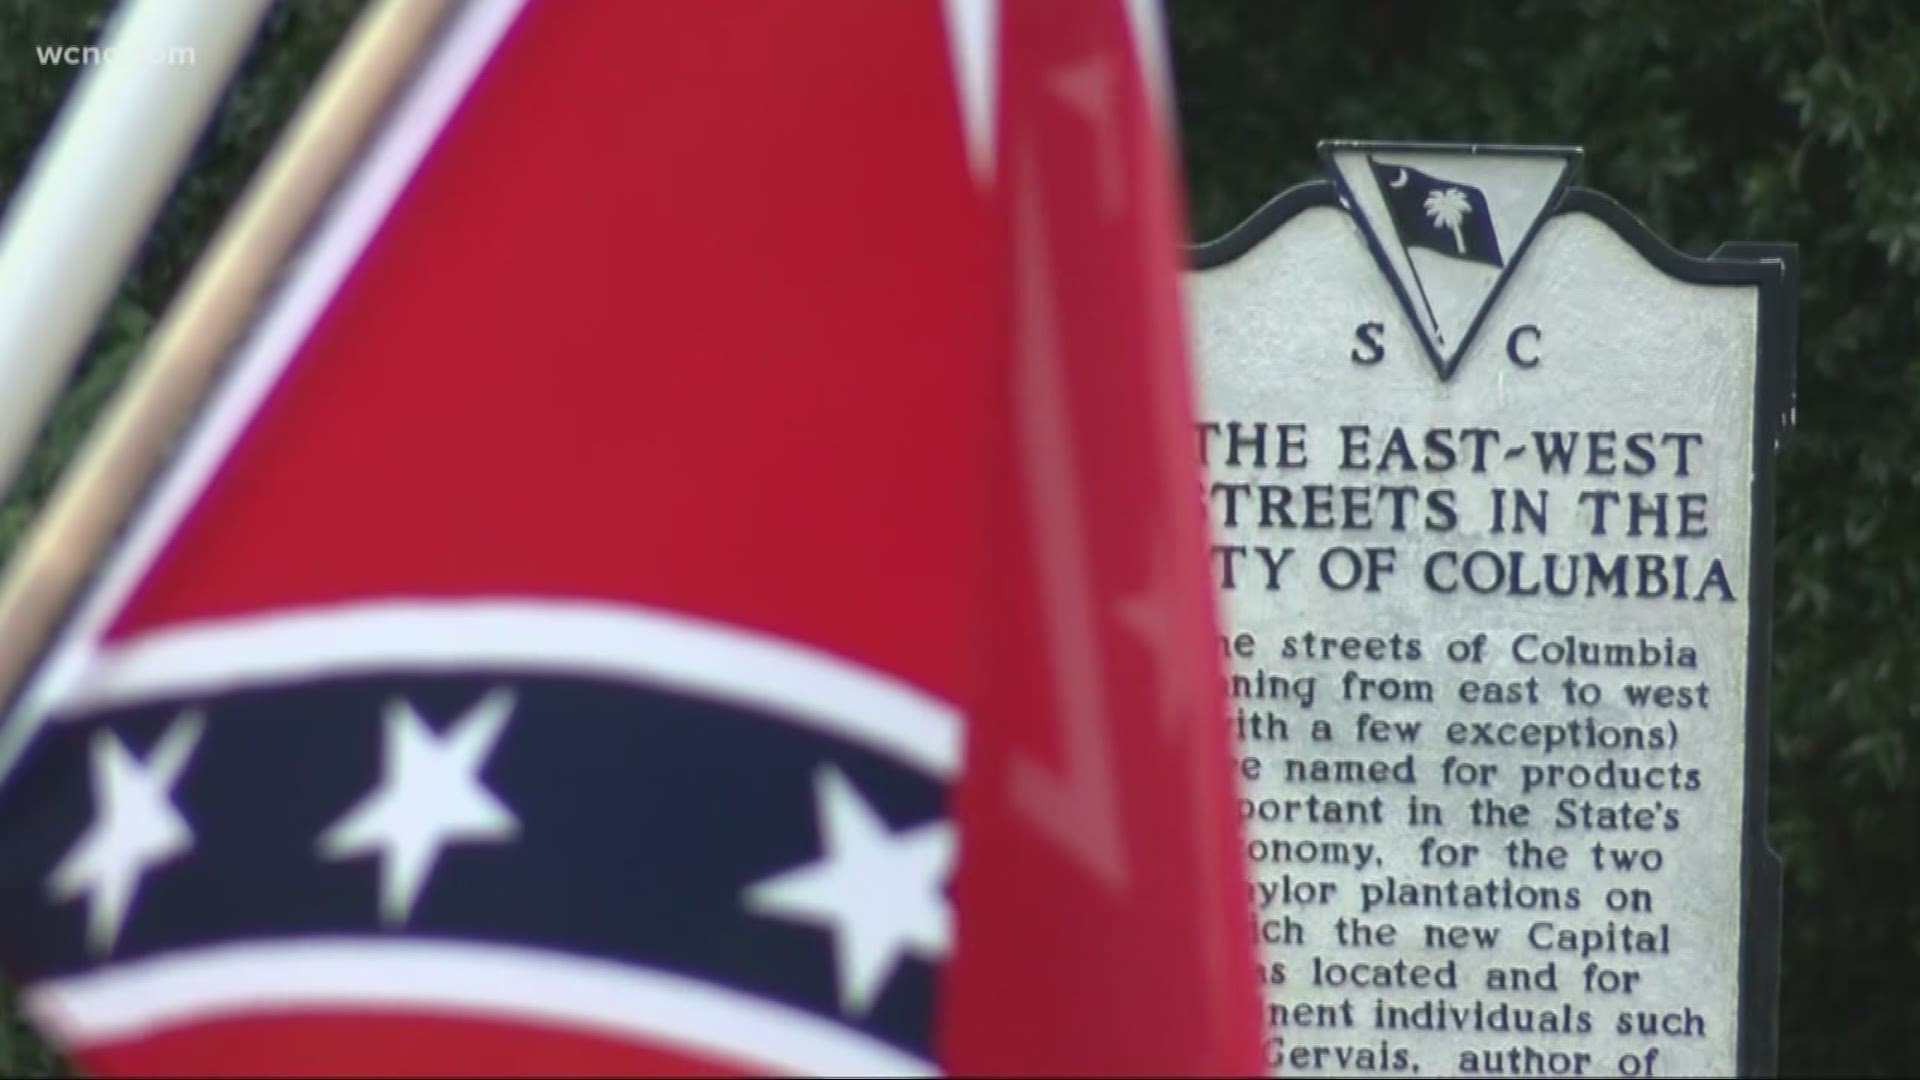 The now-dissolved "Secessionist Party" has applied for a permit to use State House grounds every July 10 to raise the Confederate flag, but not this year.